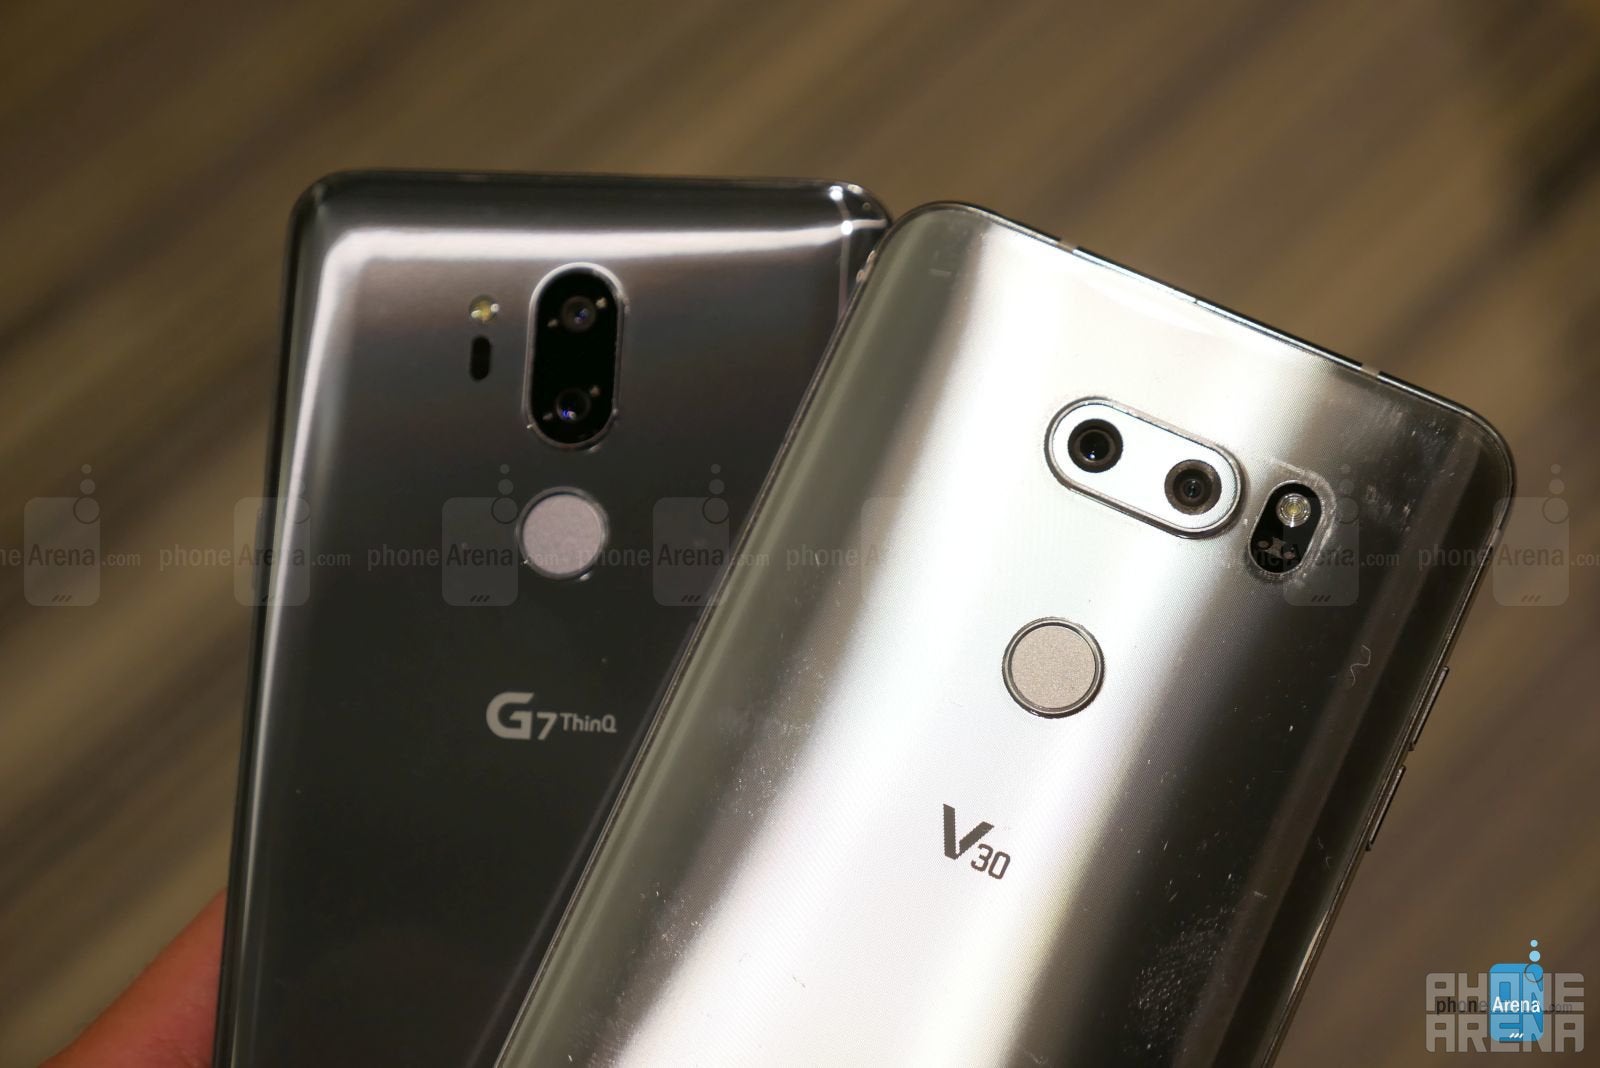 The G7 ThinQ with the V30 - LG G7 ThinQ vs LG G6: first look